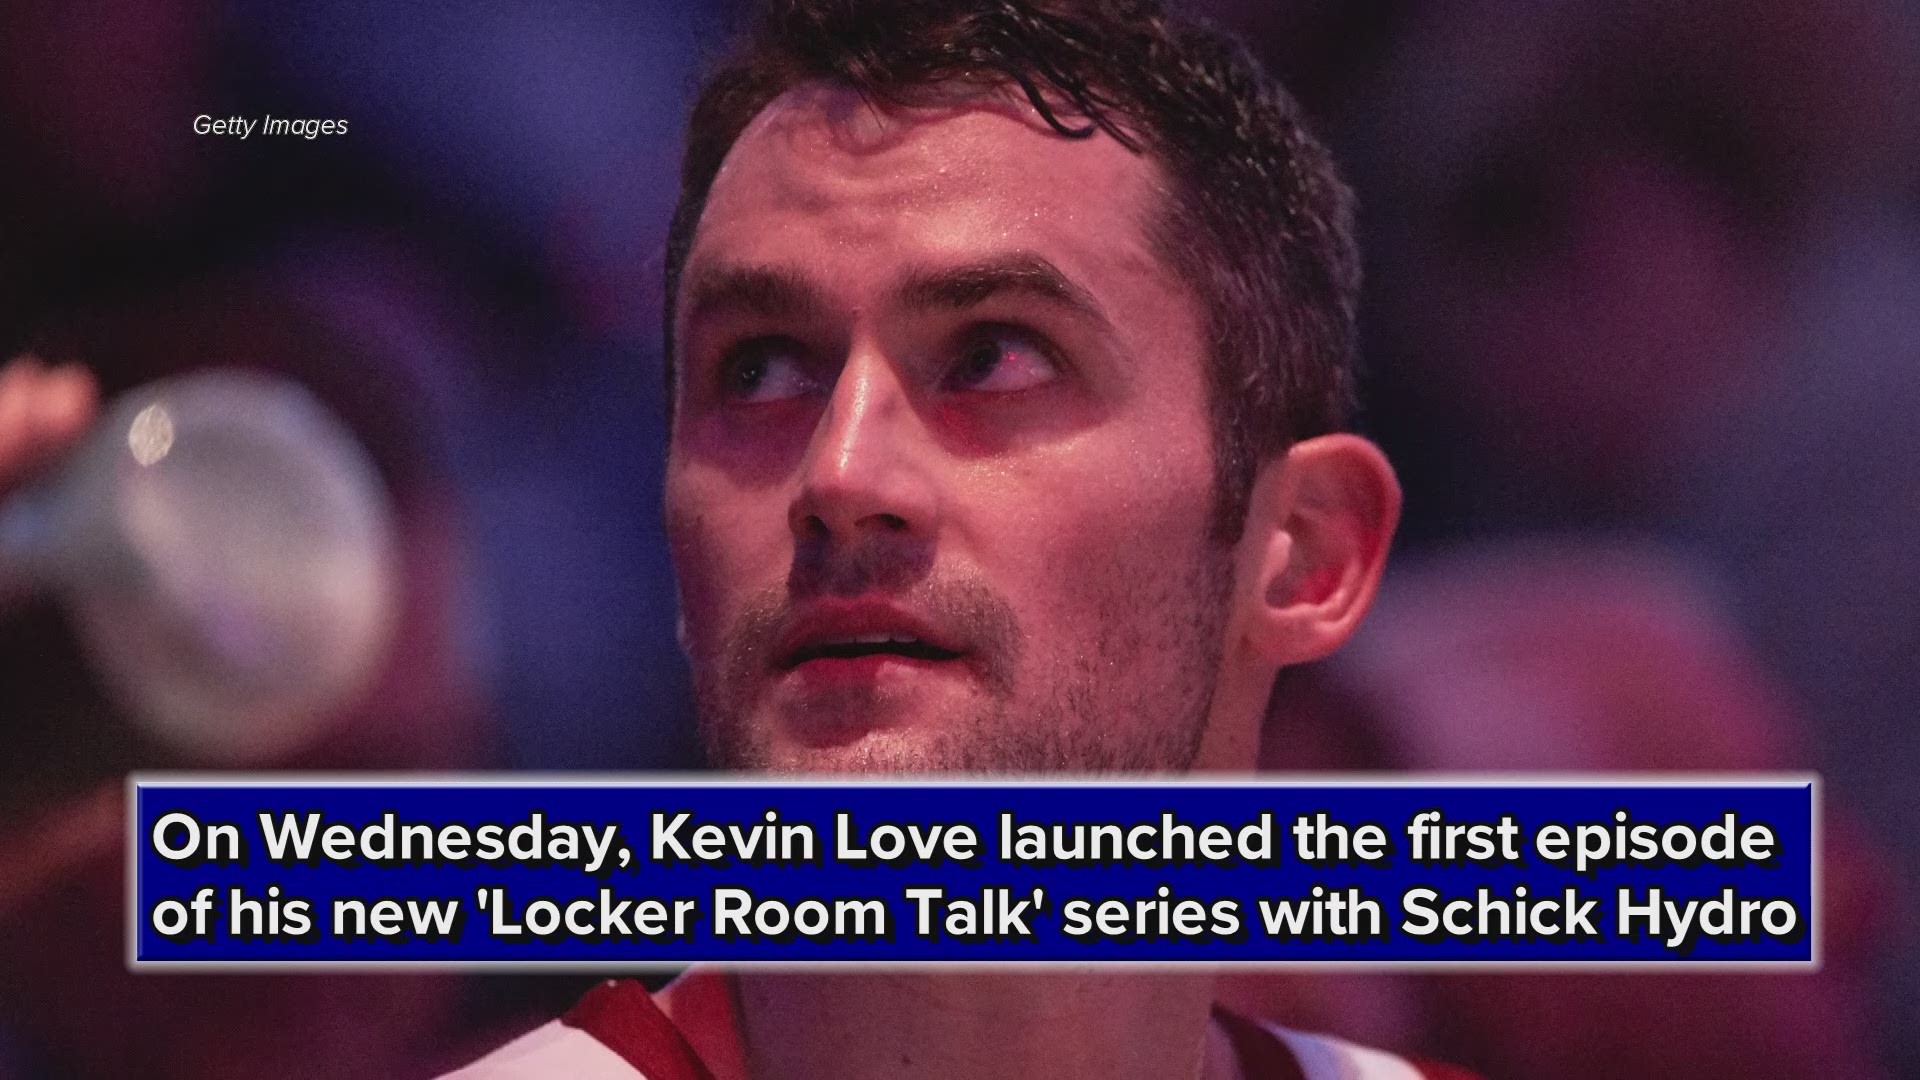 Kevin Love discusses mental health with Michael Phelps in first episode of 'Locker Room Talk'